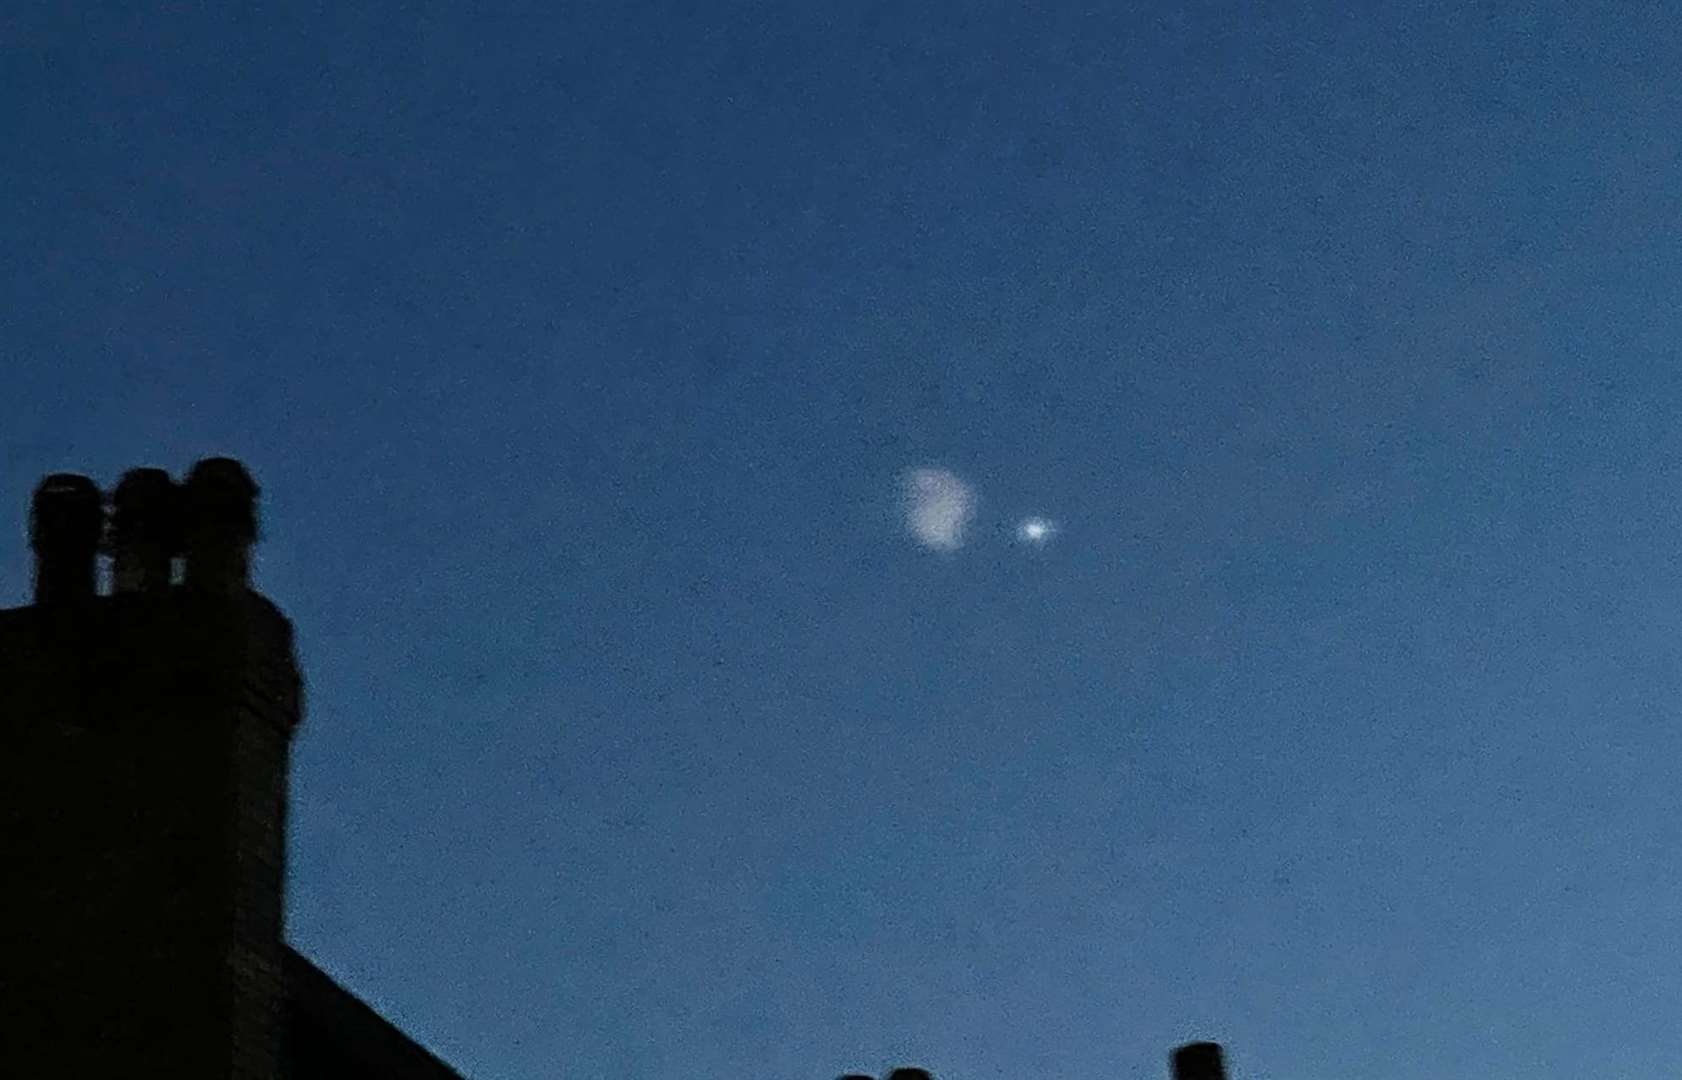 The lights in the sky Linda Hicks saw from her home in Folkestone. Picture: Linda Hicks